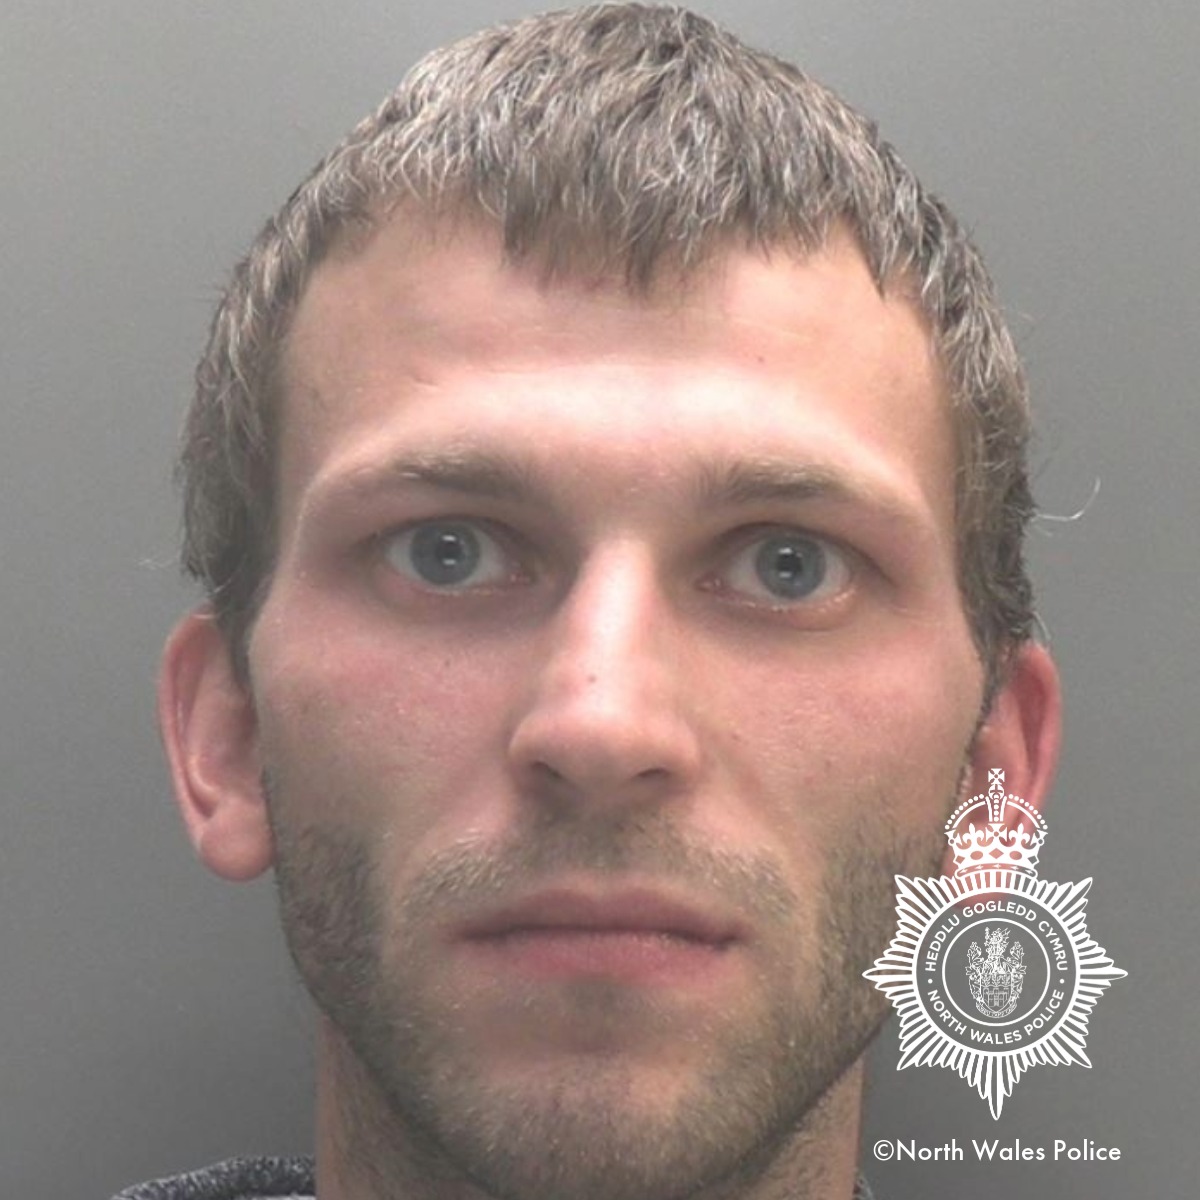 Blaenau man sentenced to 12 years for sexual offences